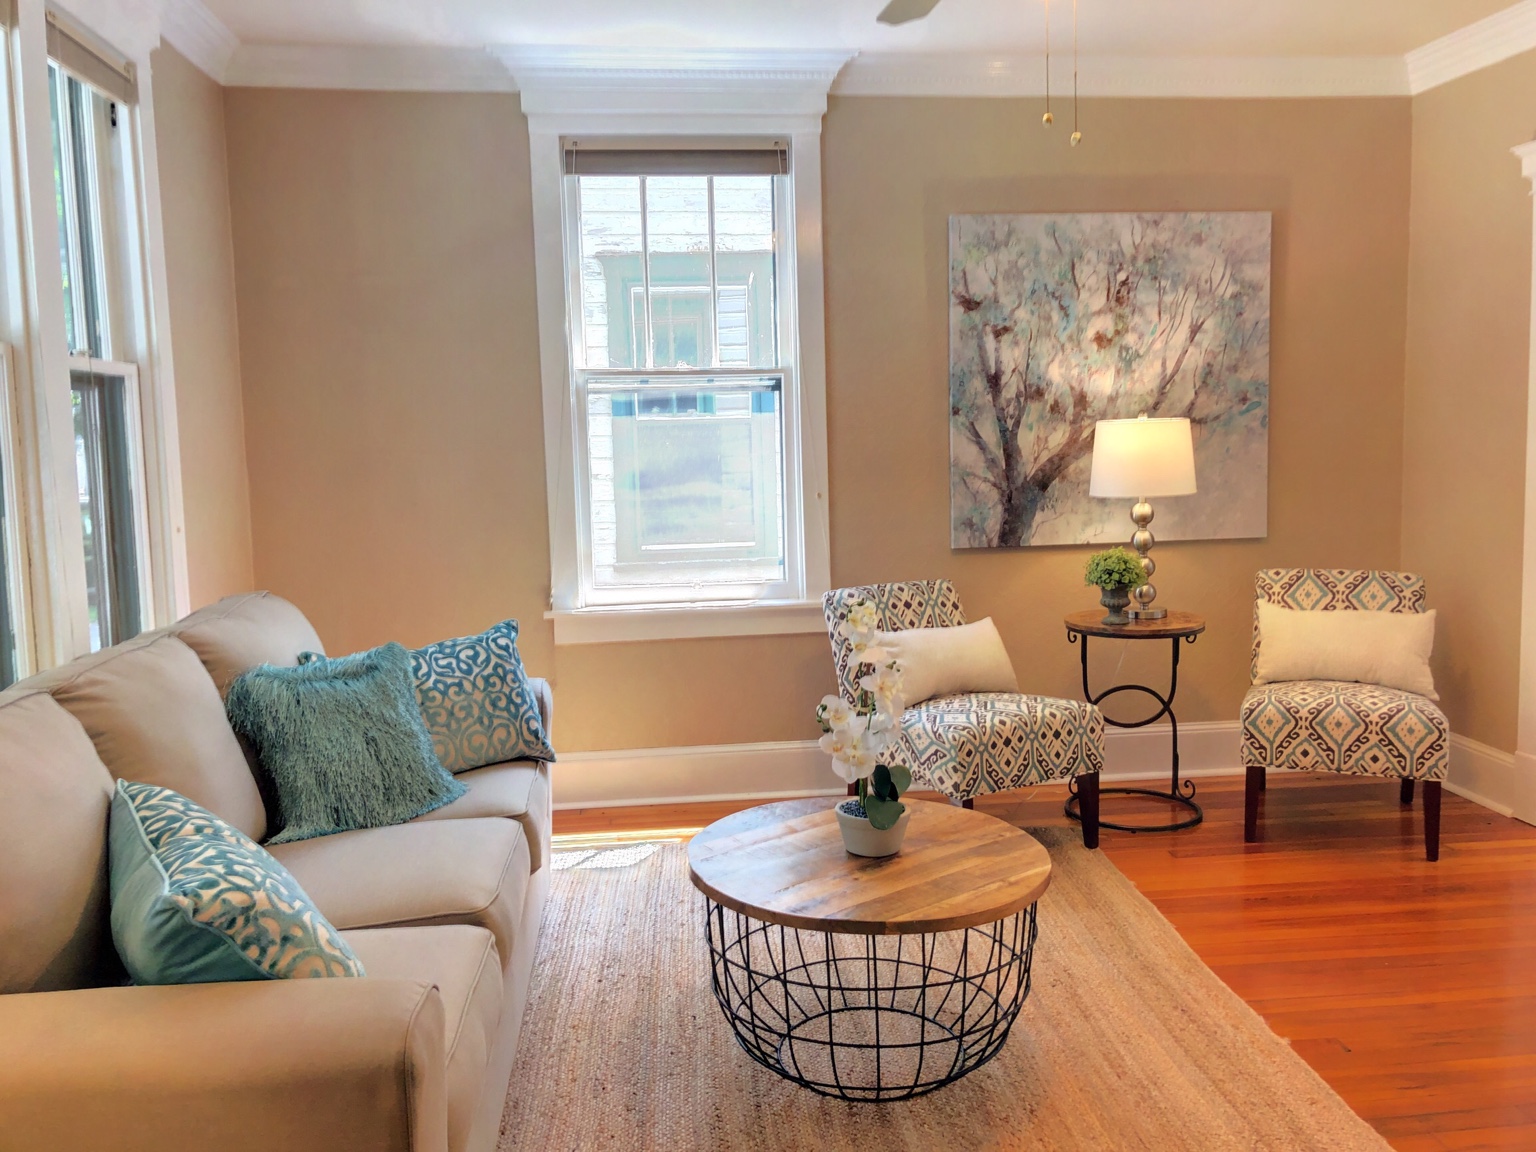 Home staging for realtors in PA, services by stager Sherri Blum